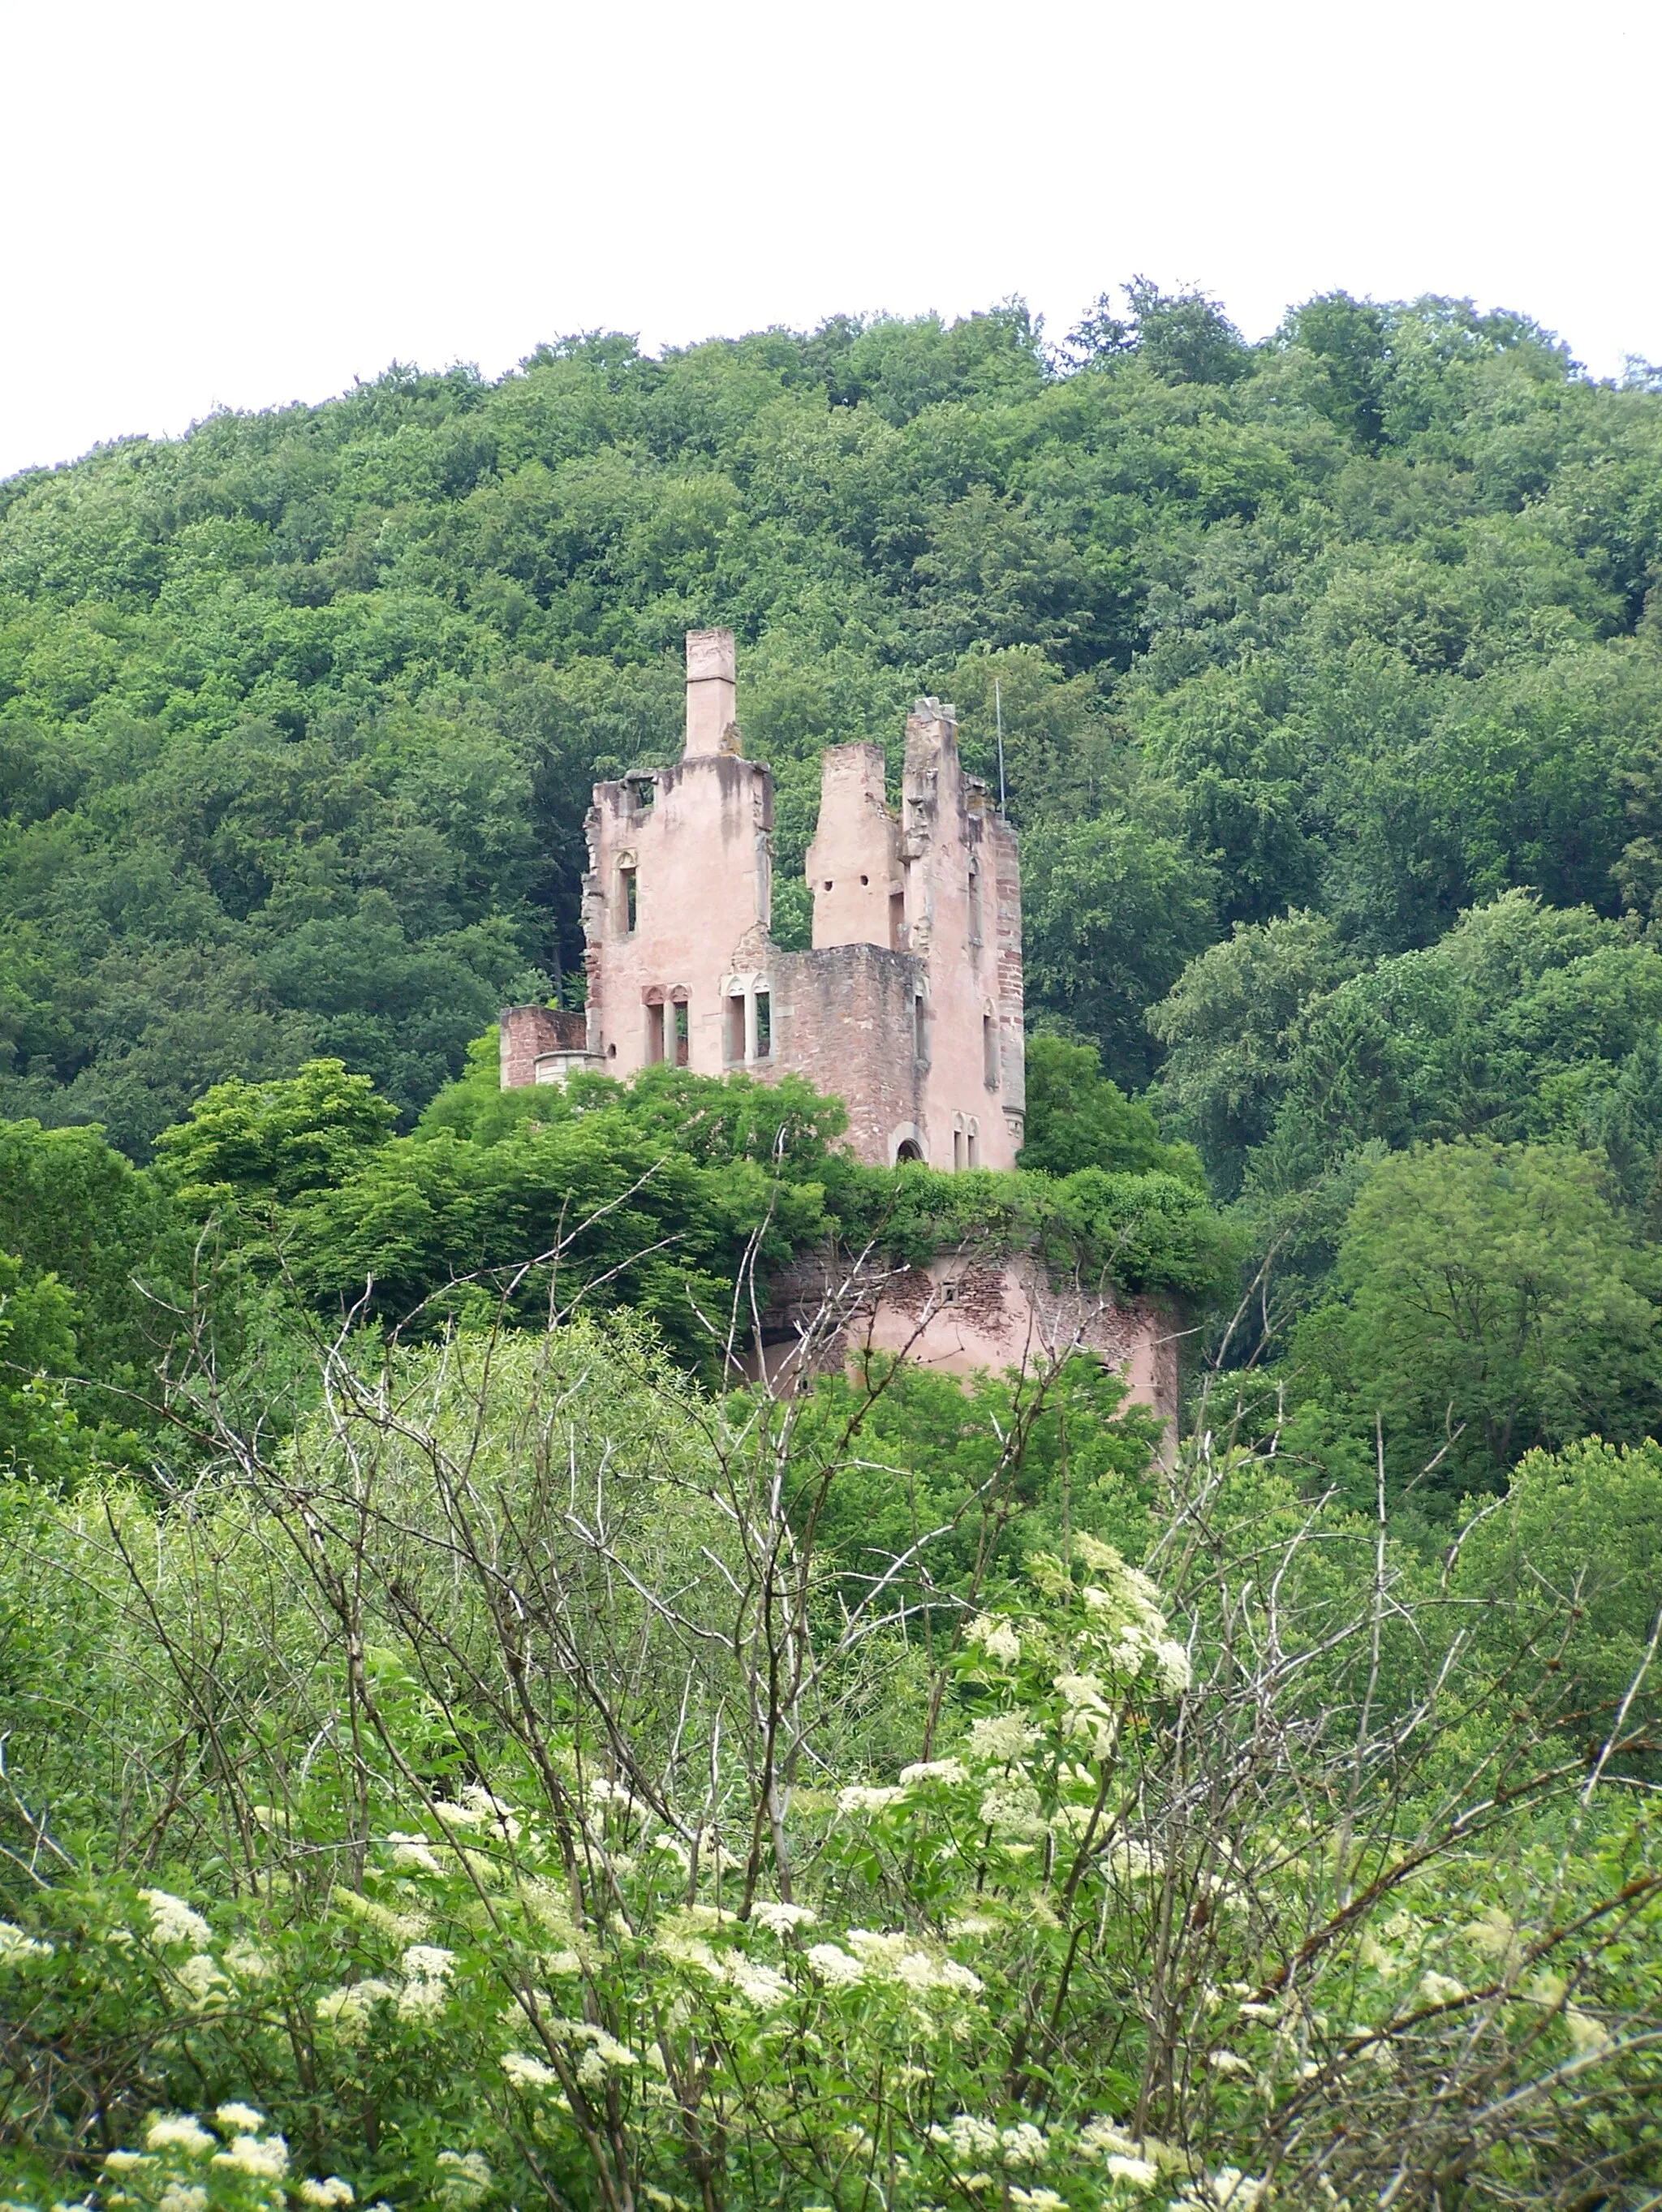 Photo showing: Ruins of Burg Ramstein seen from the Kylltal bicycle route, south of the ruins.